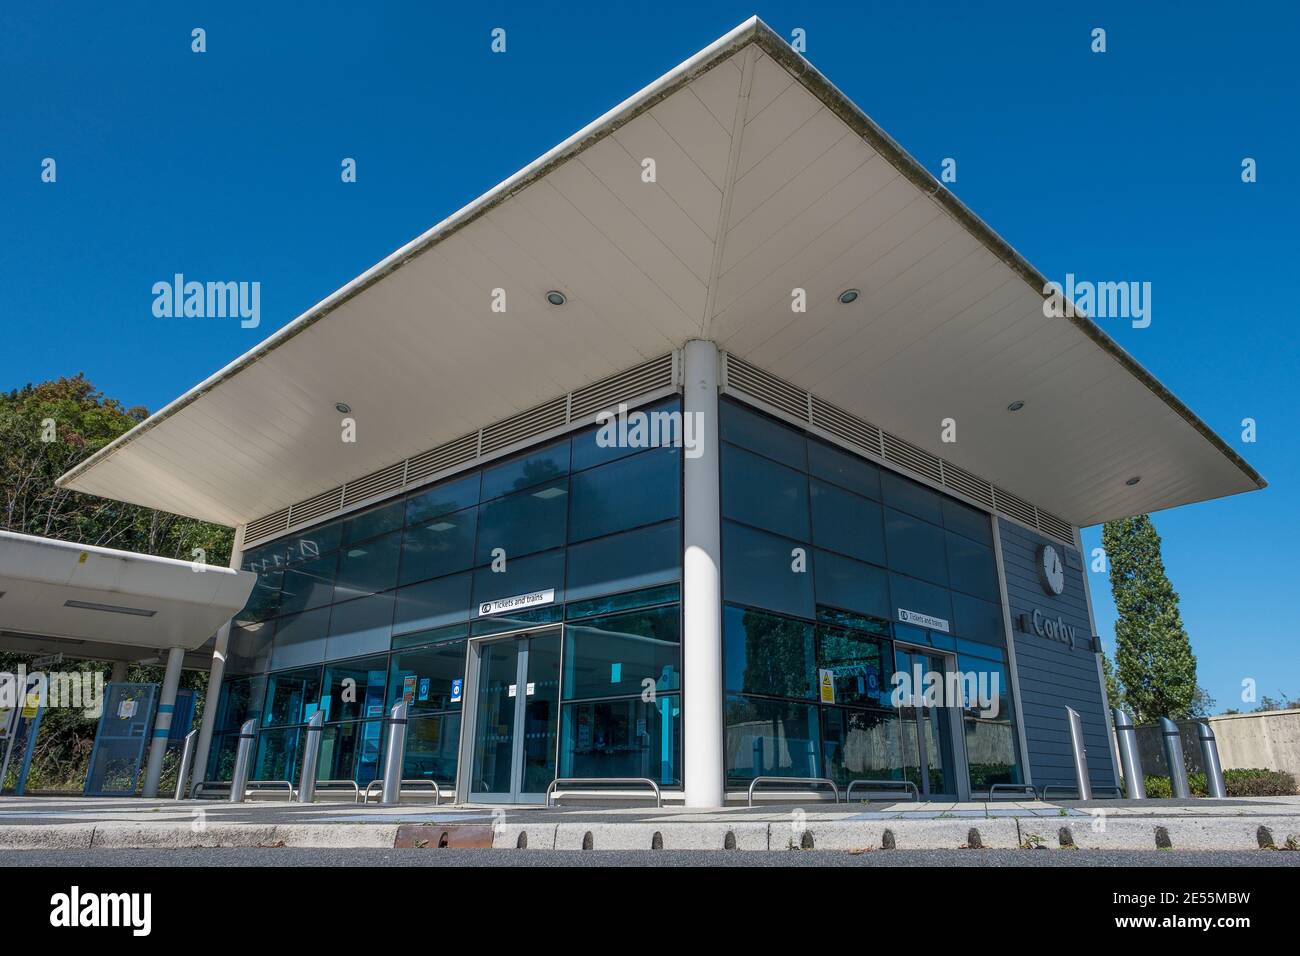 Exterior of Corby railway station. Stock Photo